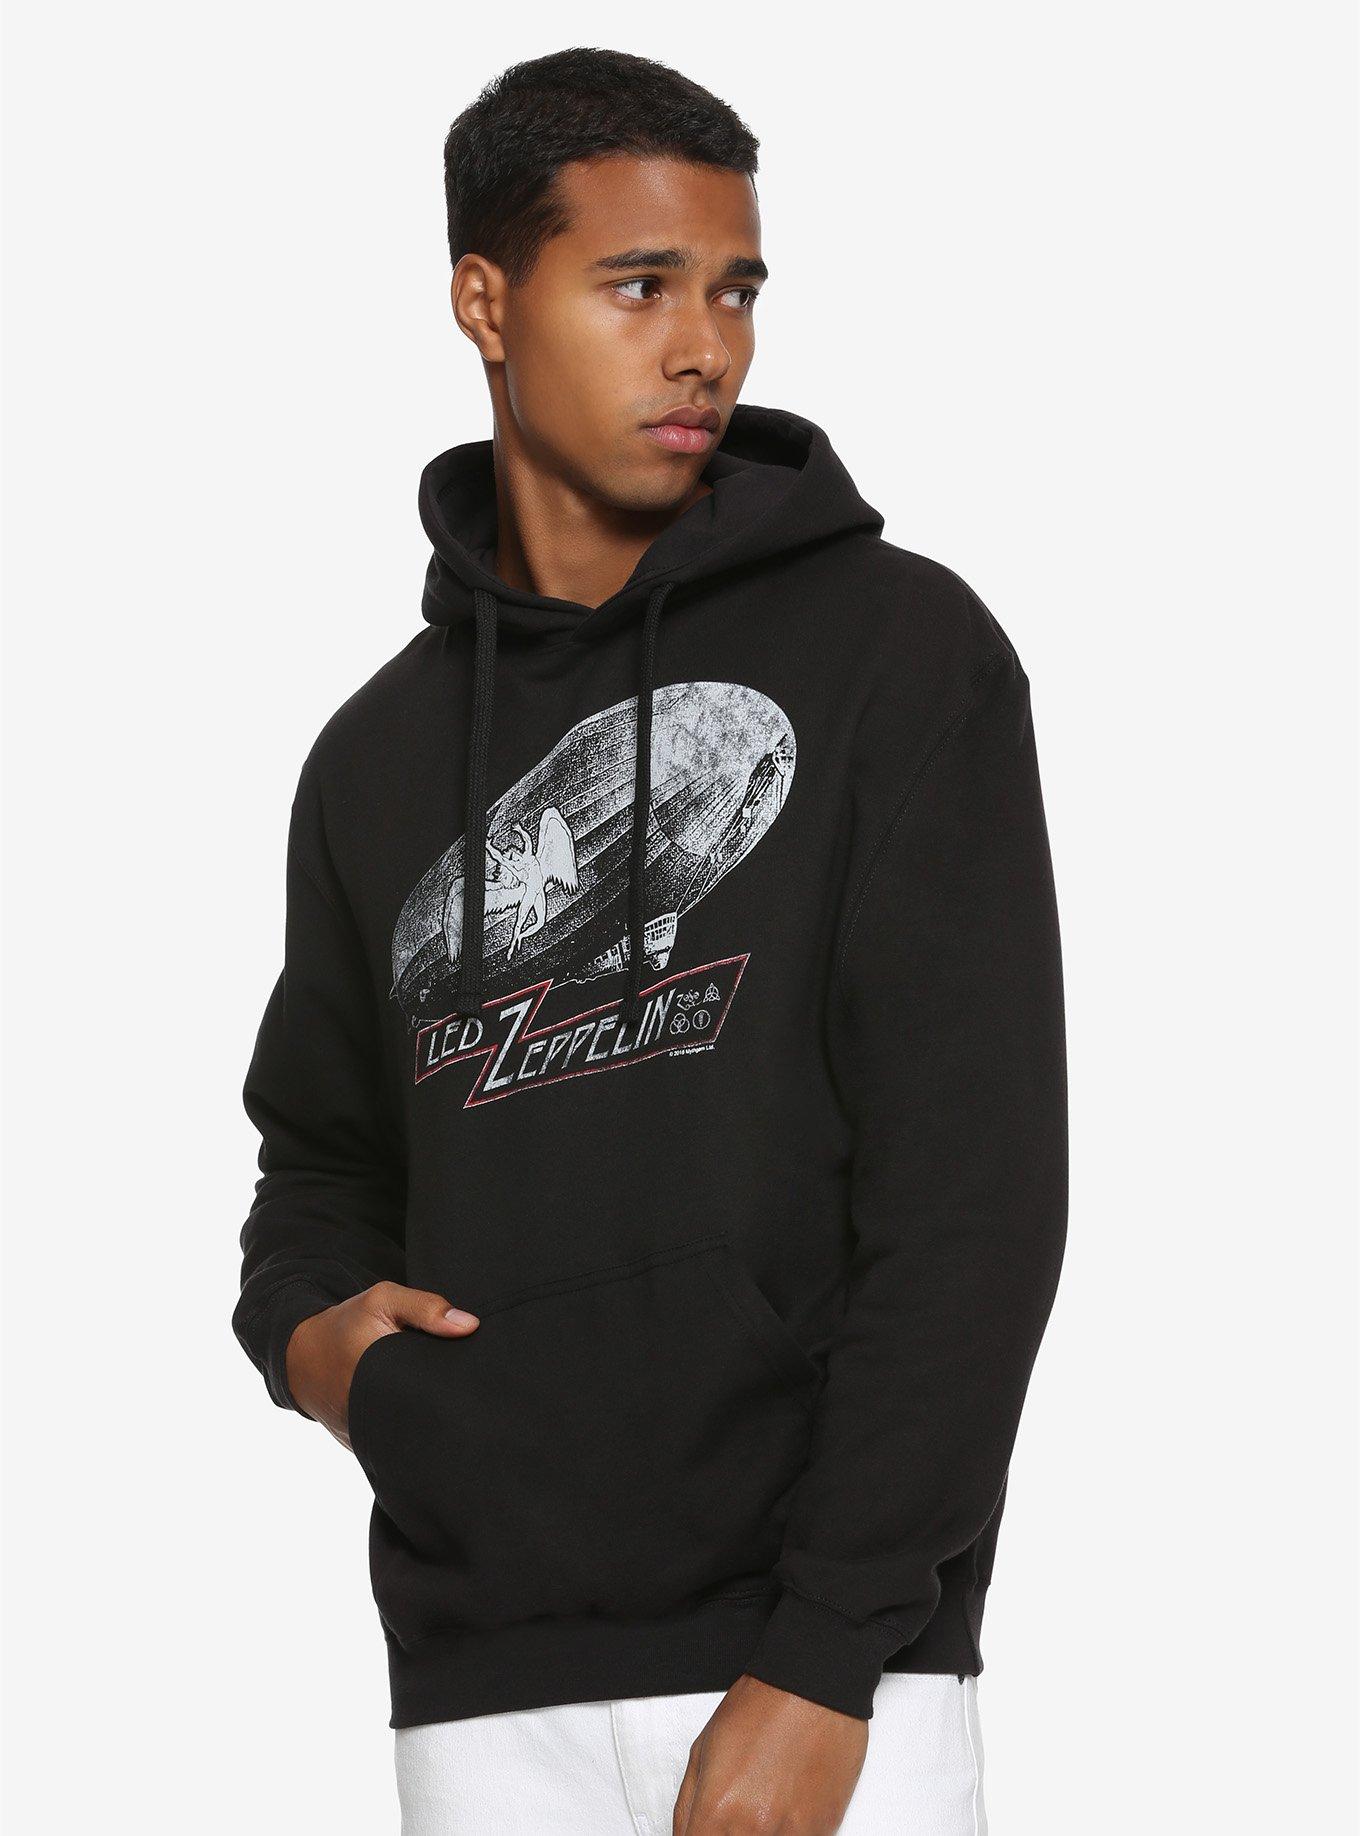 Led Zeppelin 1977 U.S. Tour Hoodie | Hot Topic